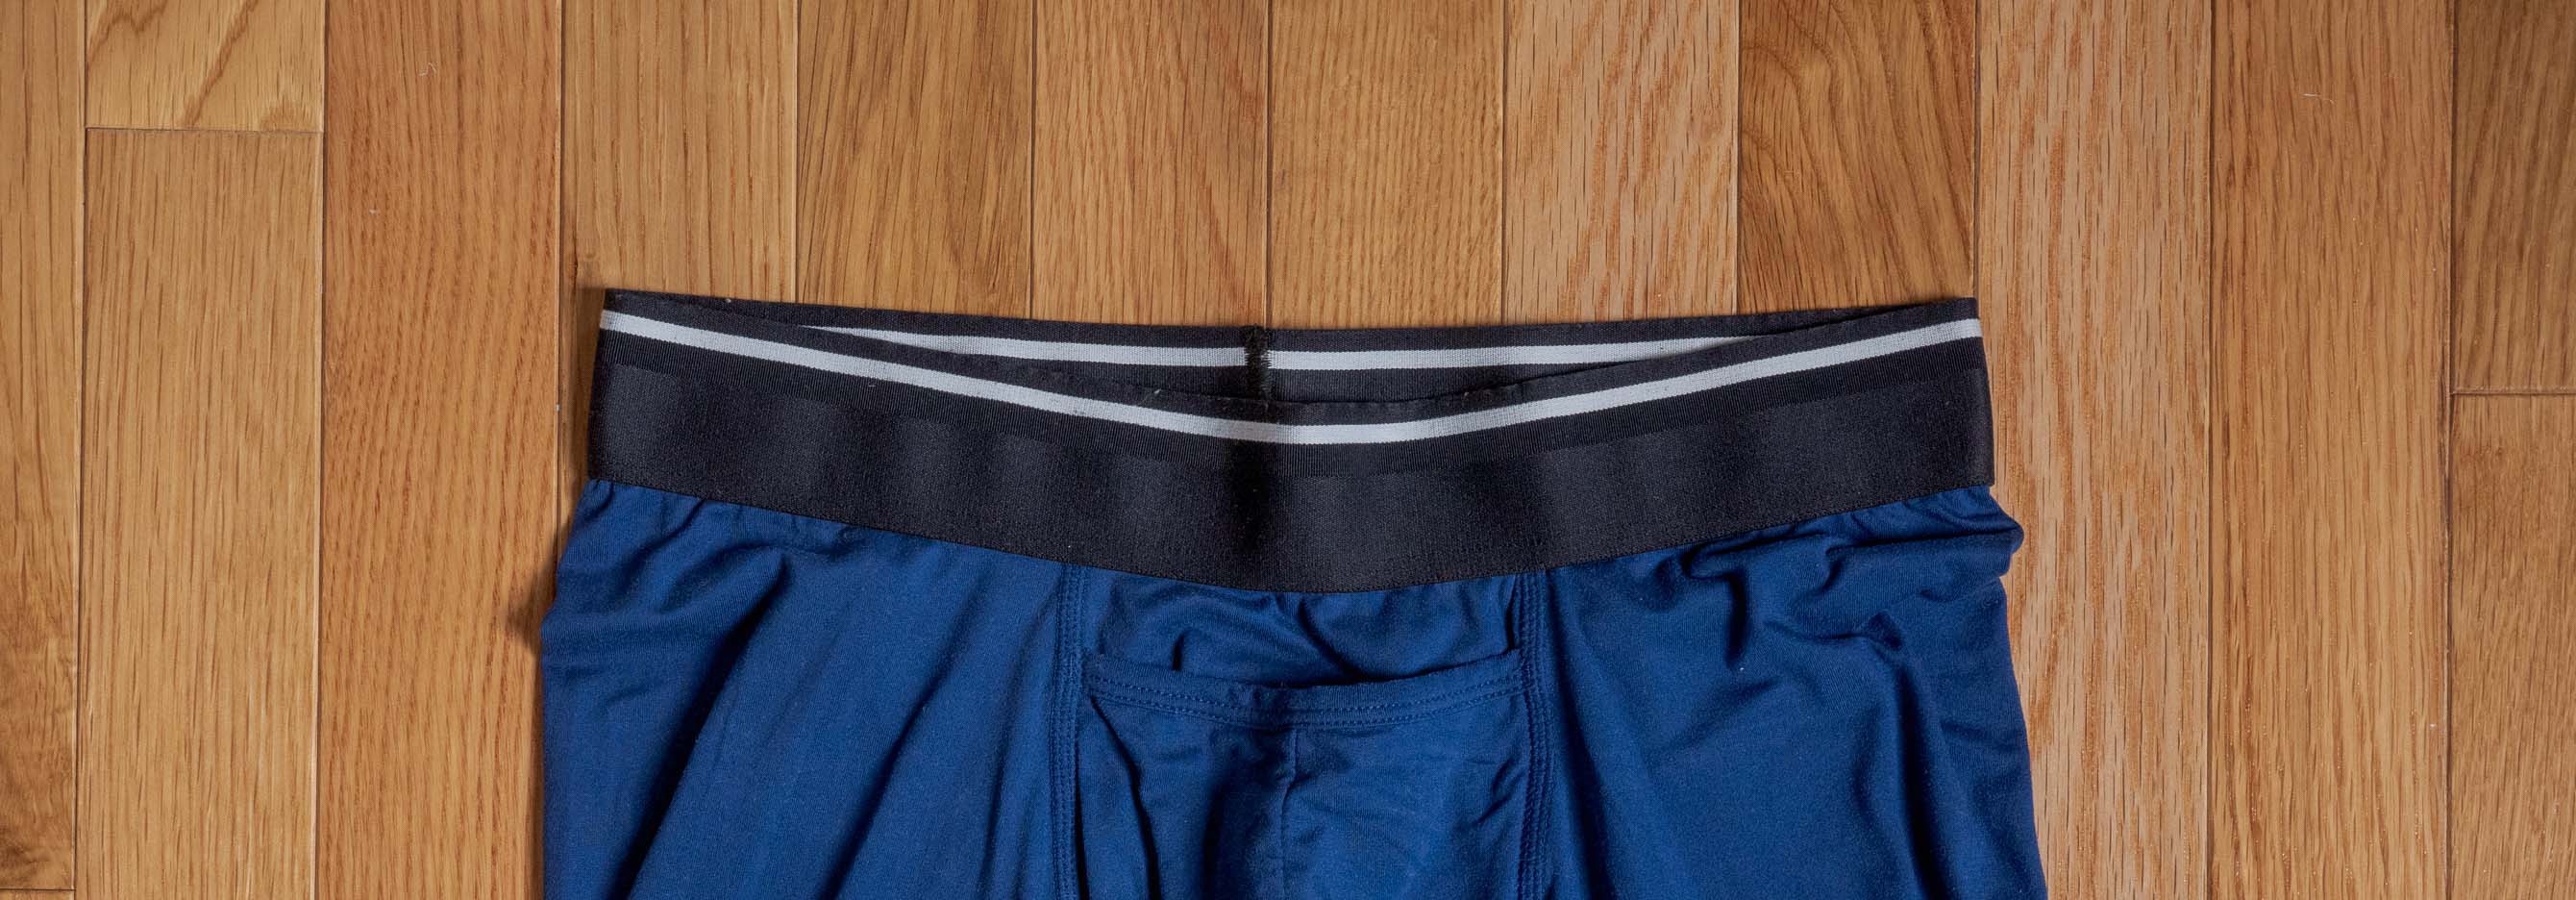 All Citizens on Instagram: We take underwear seriously to ensure that you  guys can experience the unparalleled comfort.⁣ ⁣ #AllCitizens  #democratizecomfort #betterbydesign #mensweardaily #boxerbrief